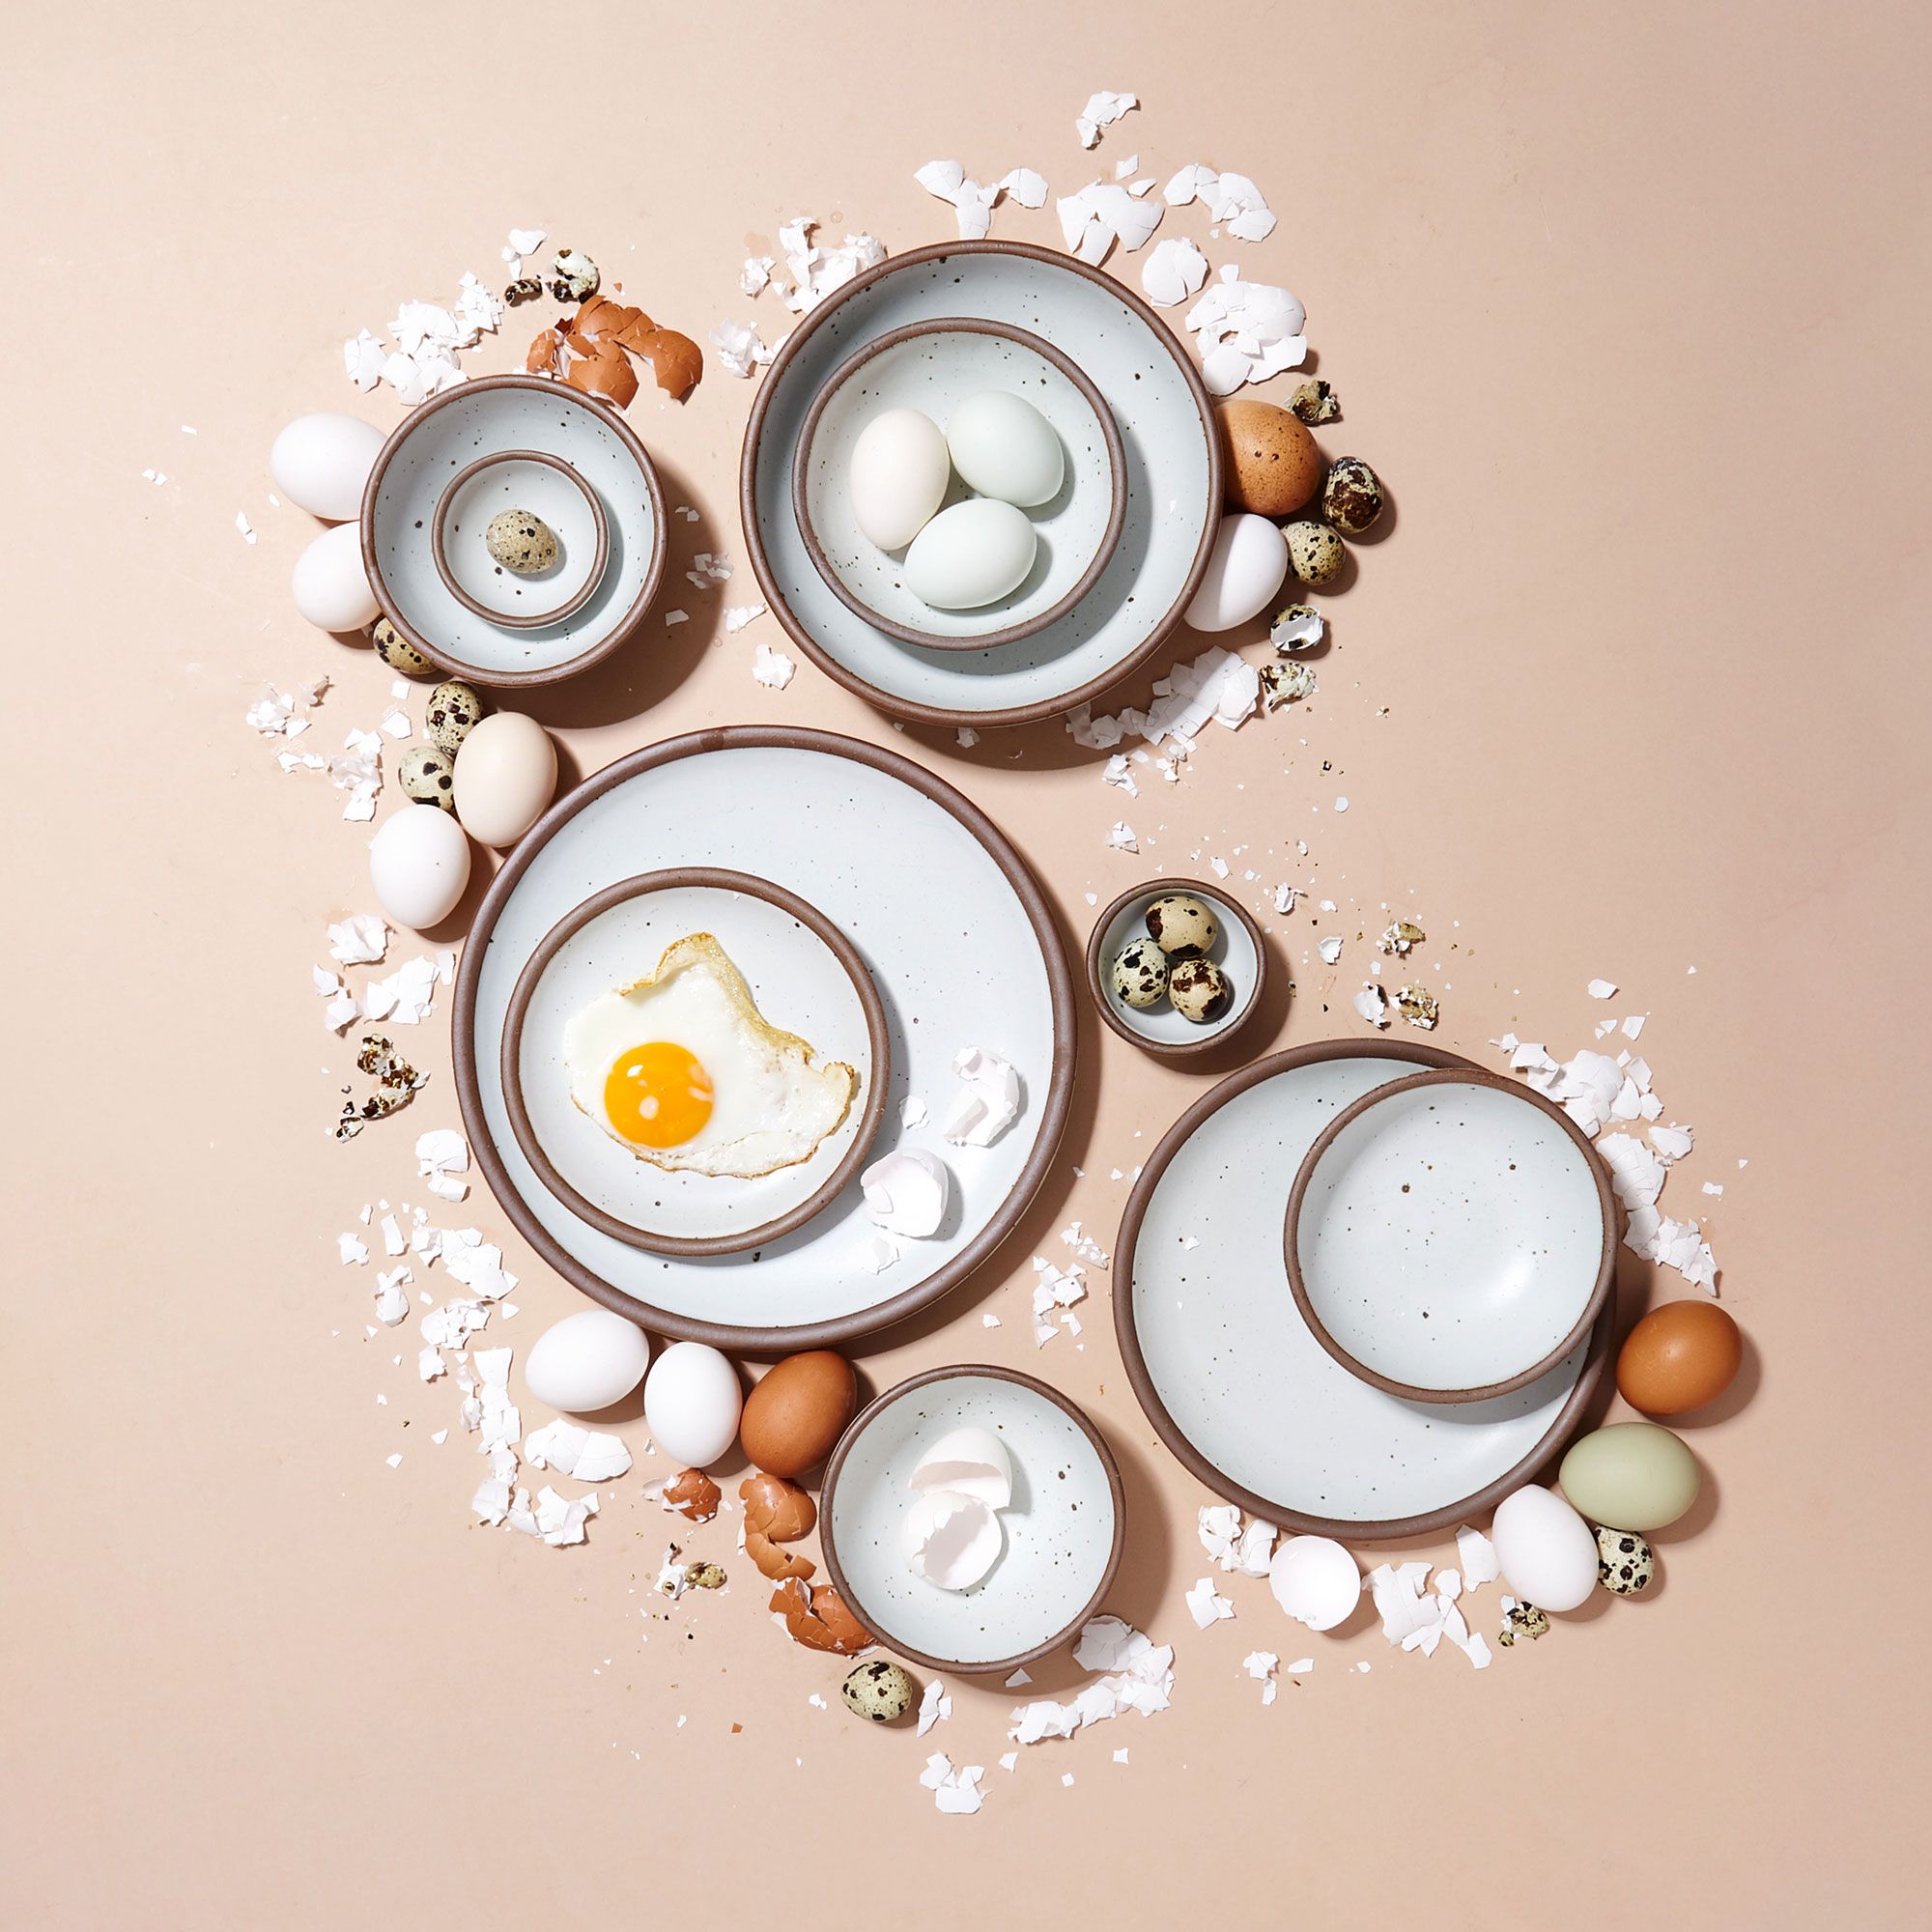 Eggshell plates and bowls with cooked and broken eggs